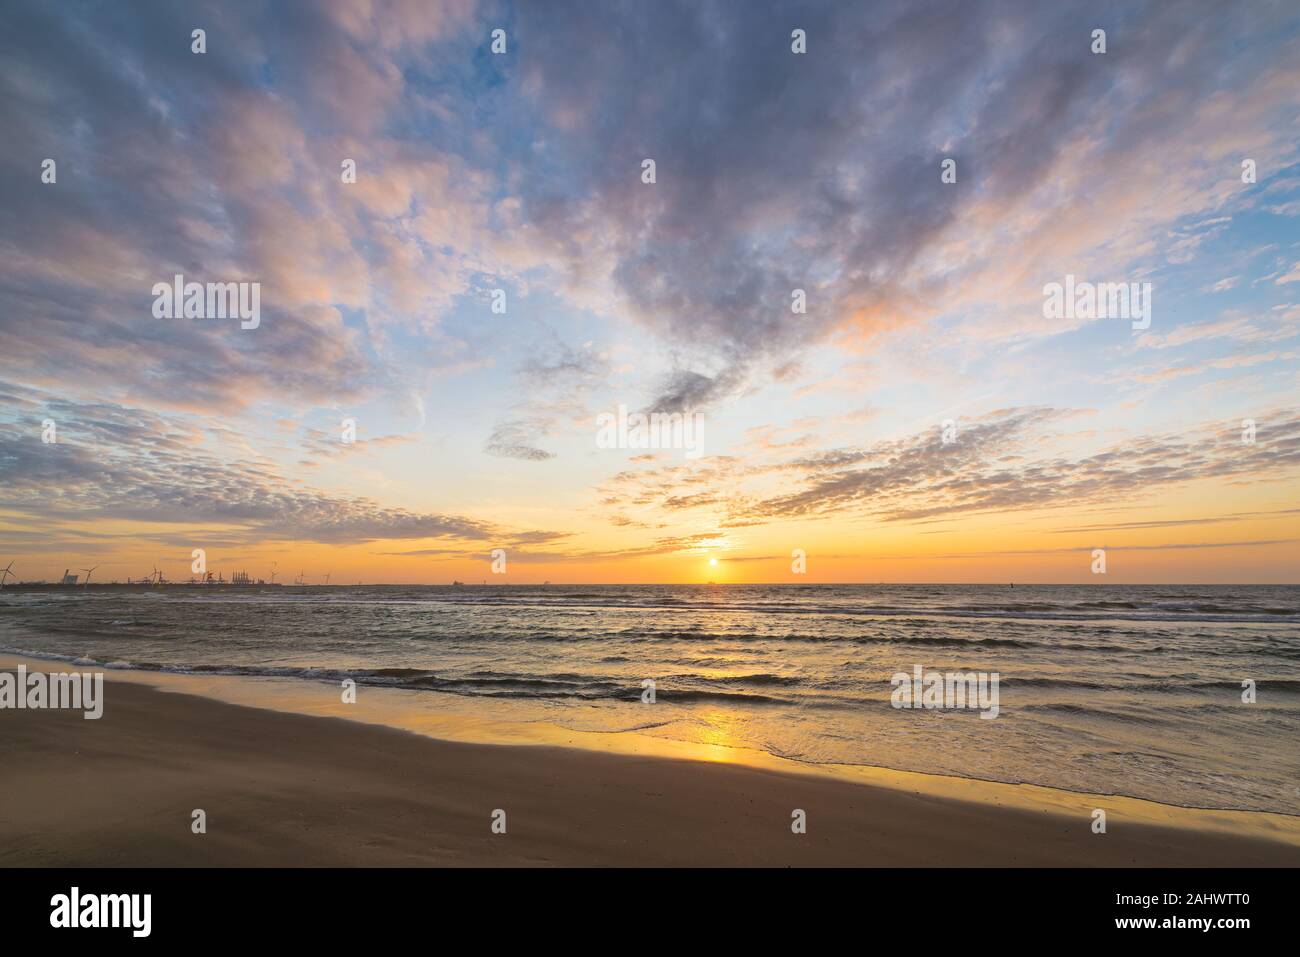 Hoek Van Holland Beach High Resolution Stock Photography and Images - Alamy